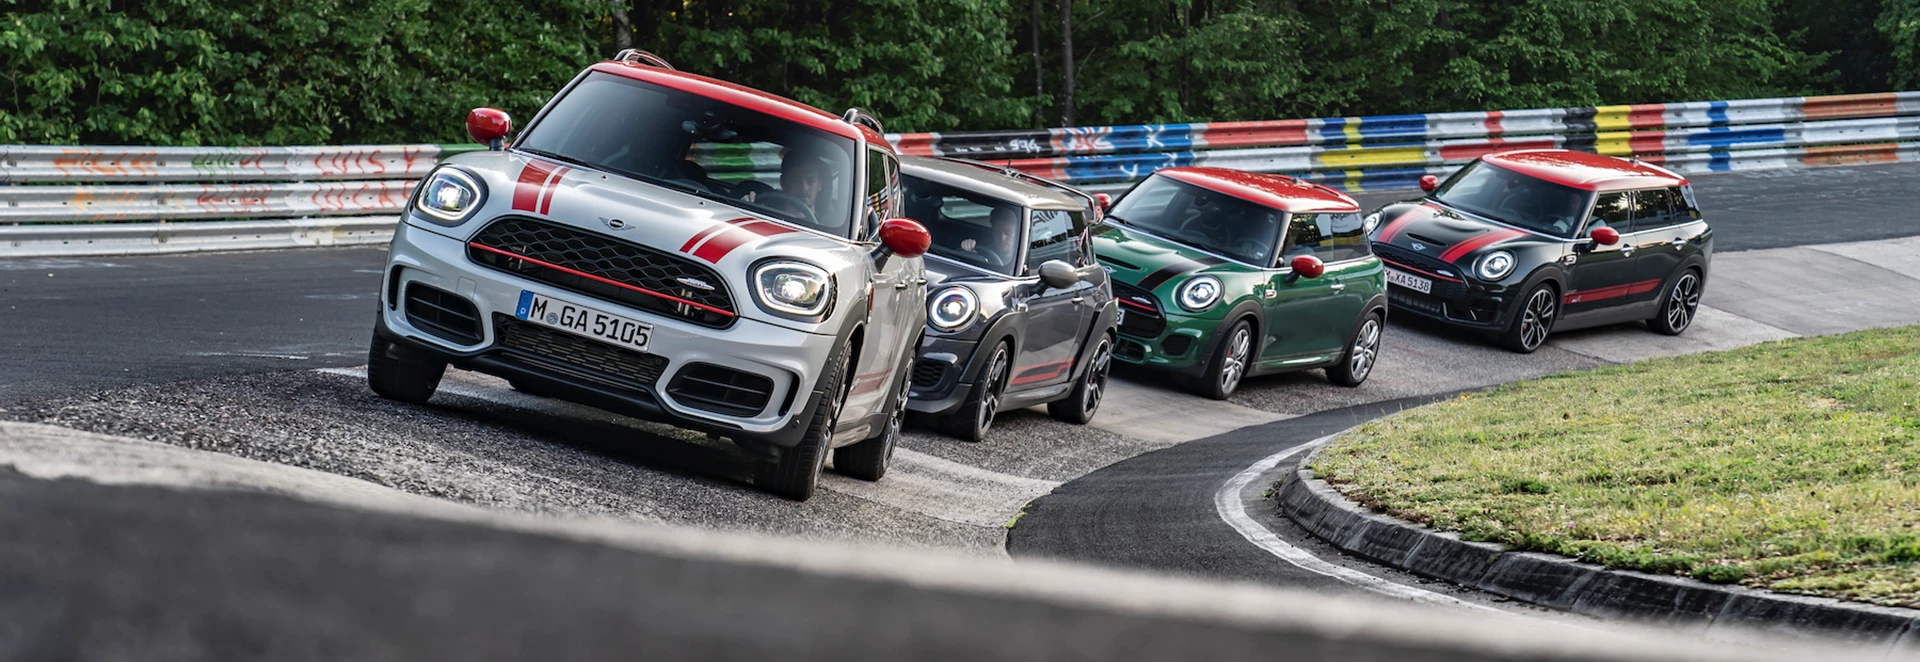 Mini John Cooper Works: What models are available? 